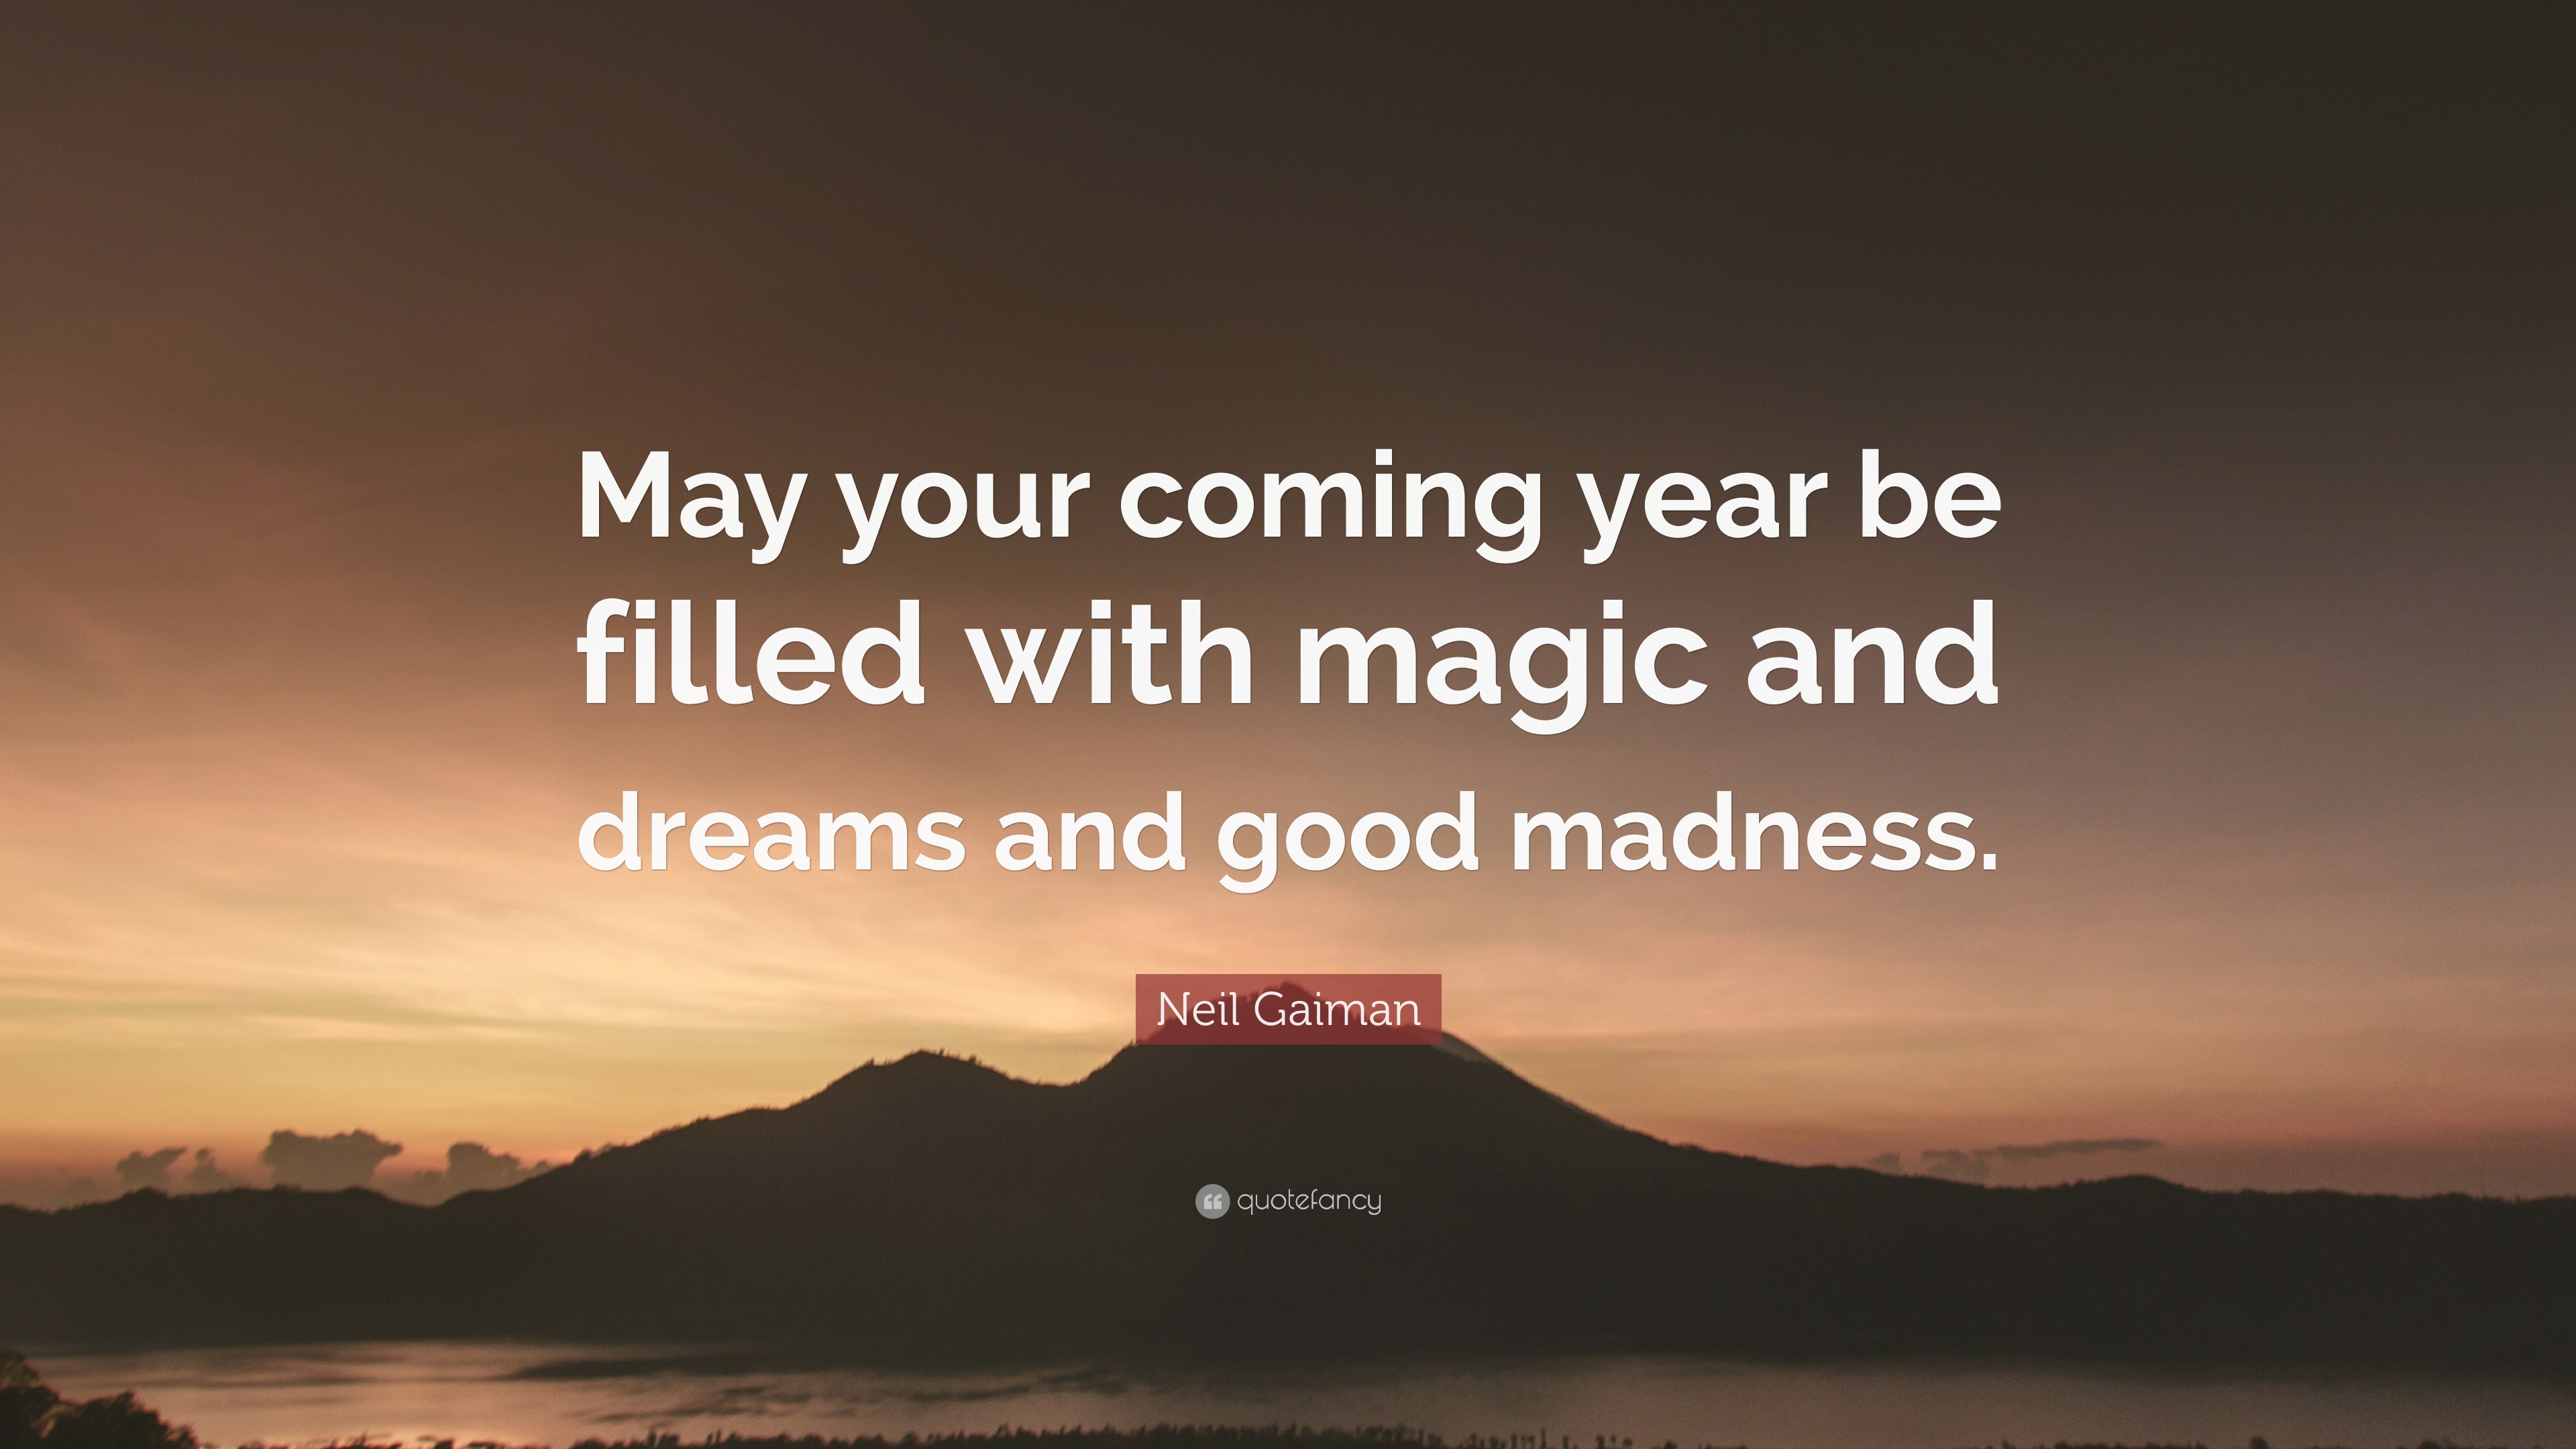 Neil Gaiman Quote: “May your coming year be filled with magic and